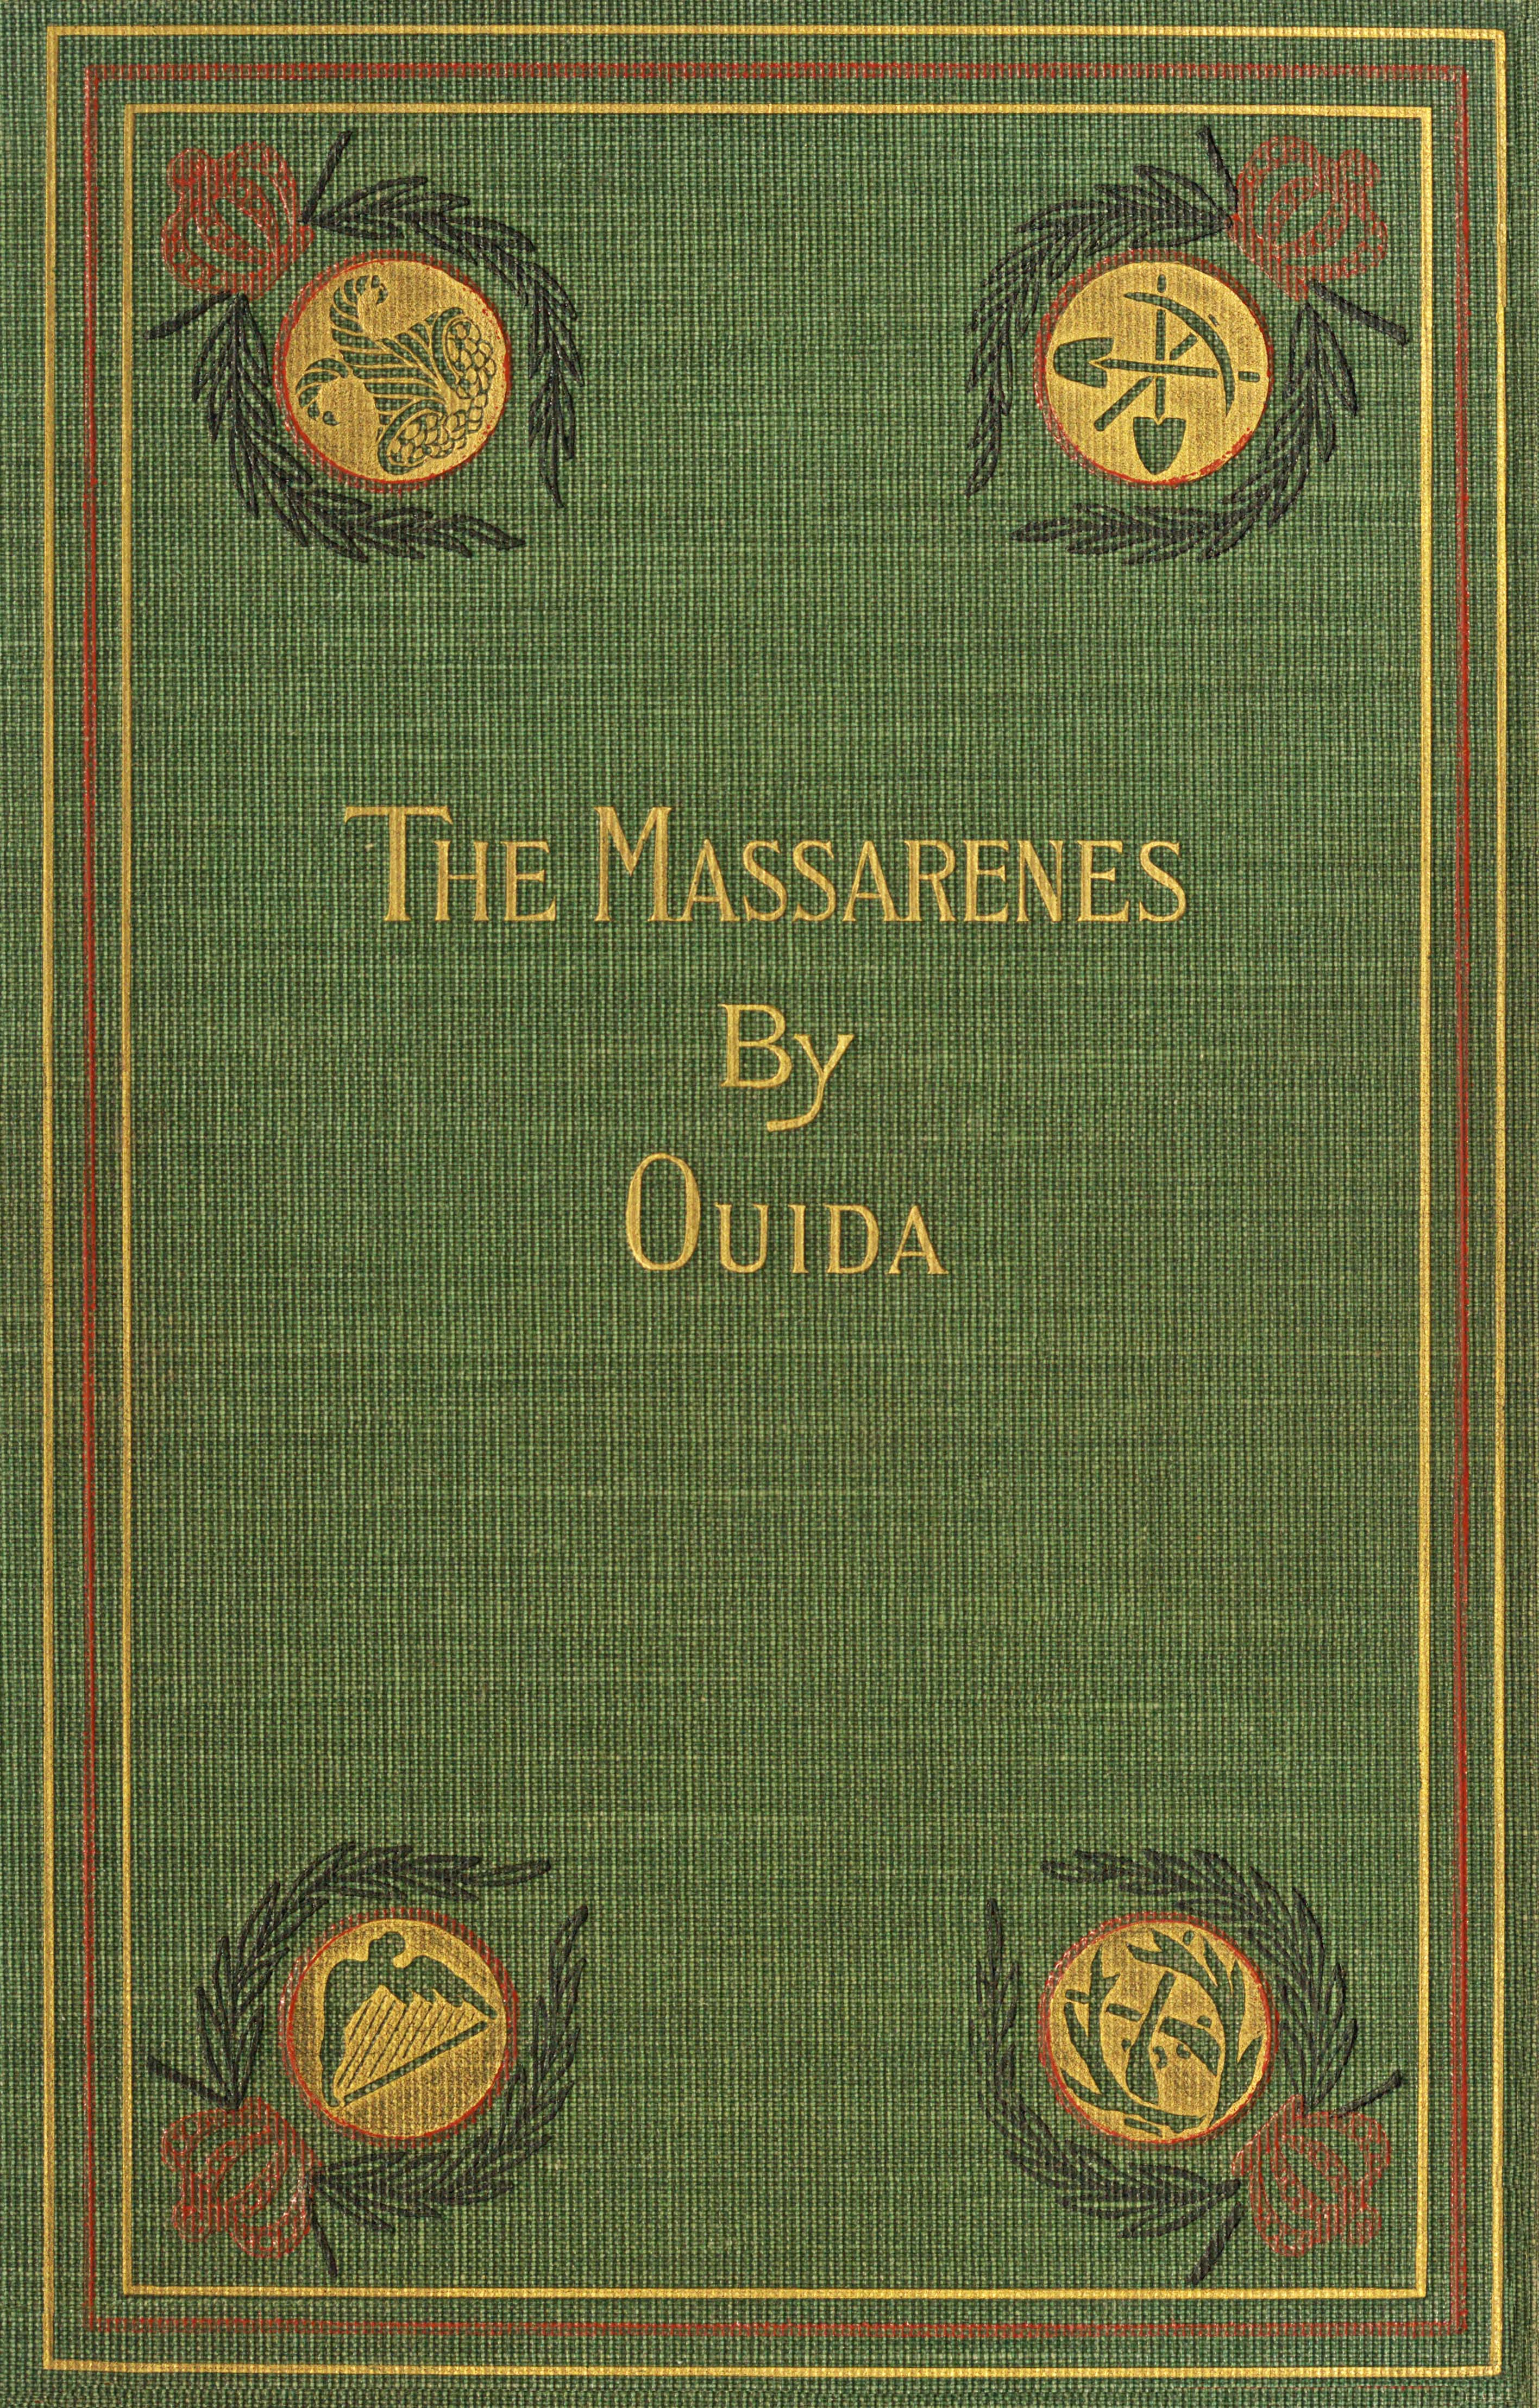 The Massarenes, by Ouida—A Project Gutenberg eBook image